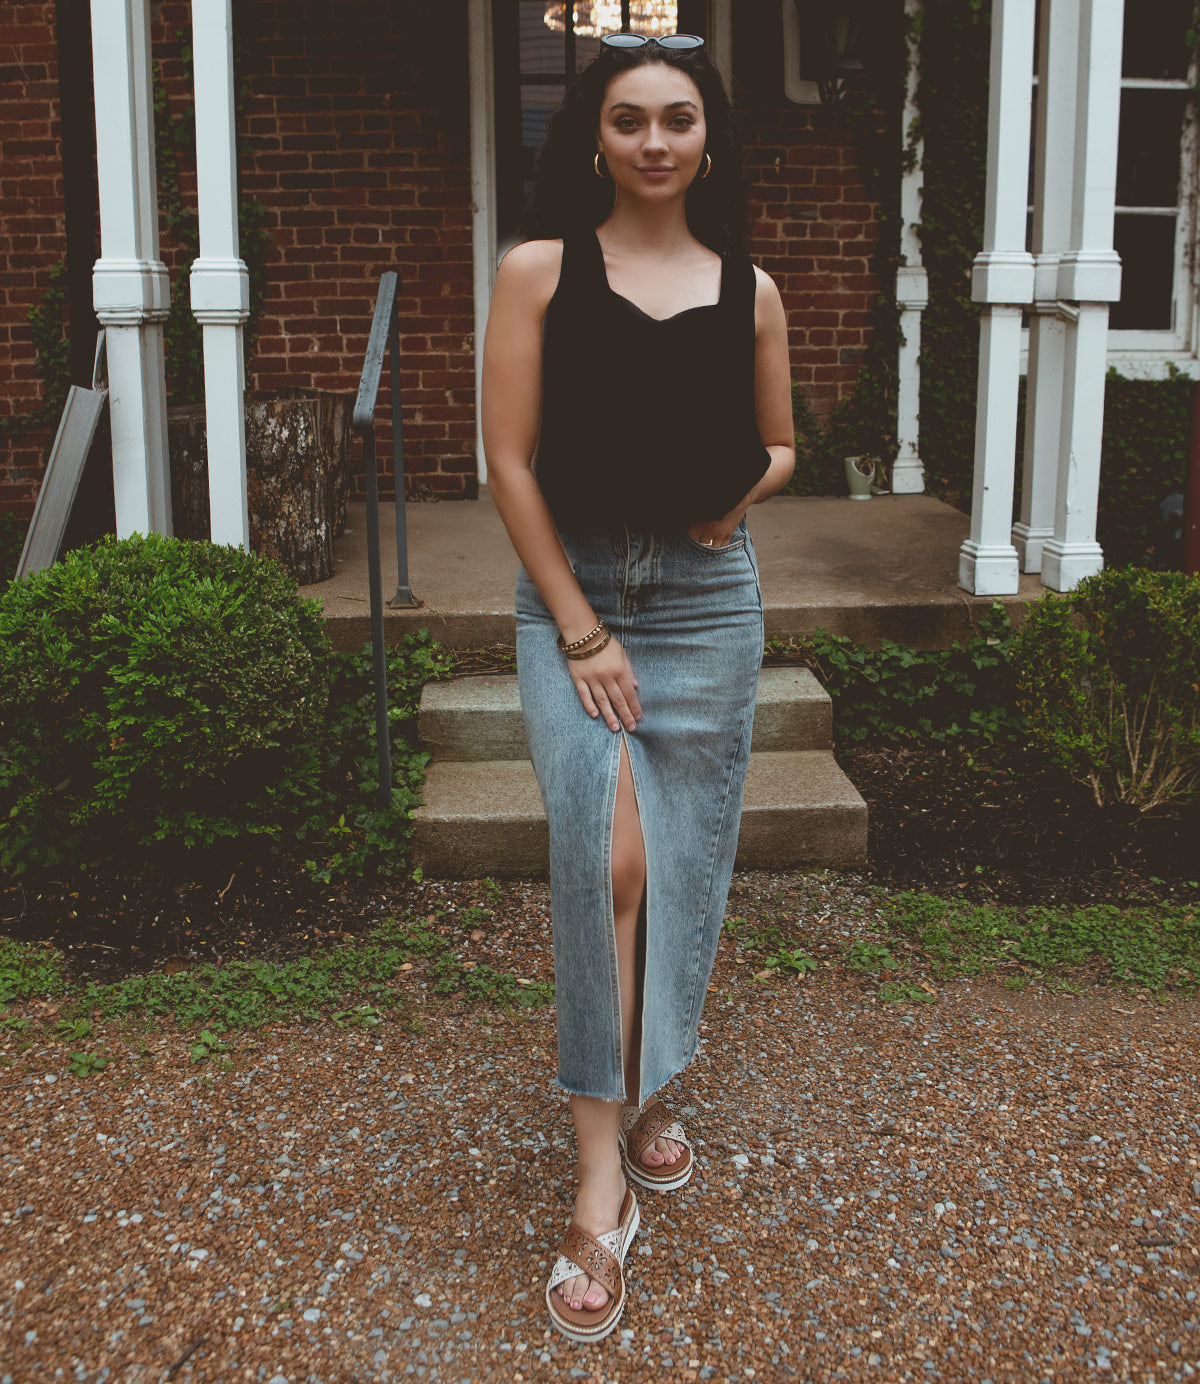 
                  
                    A woman stands in front of a brick building, wearing a black top and a long denim skirt with a front slit. She is also wearing Roan Chant lightweight sandals with leather cross straps and has one hand in her pocket.
                  
                